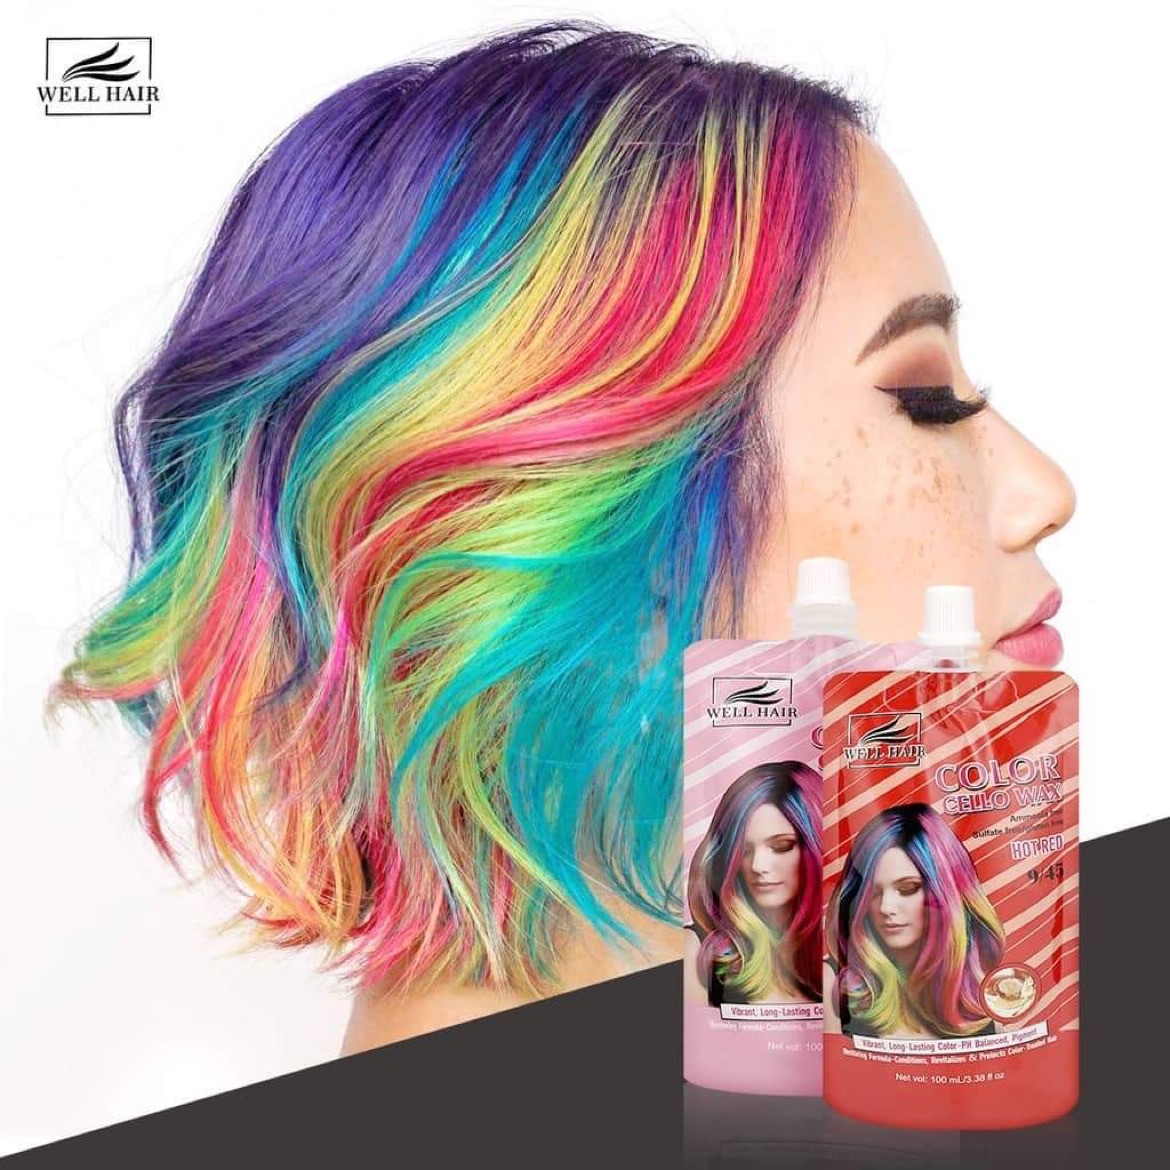 Cello Wax Hair Color - Assorted Colors (100ml)